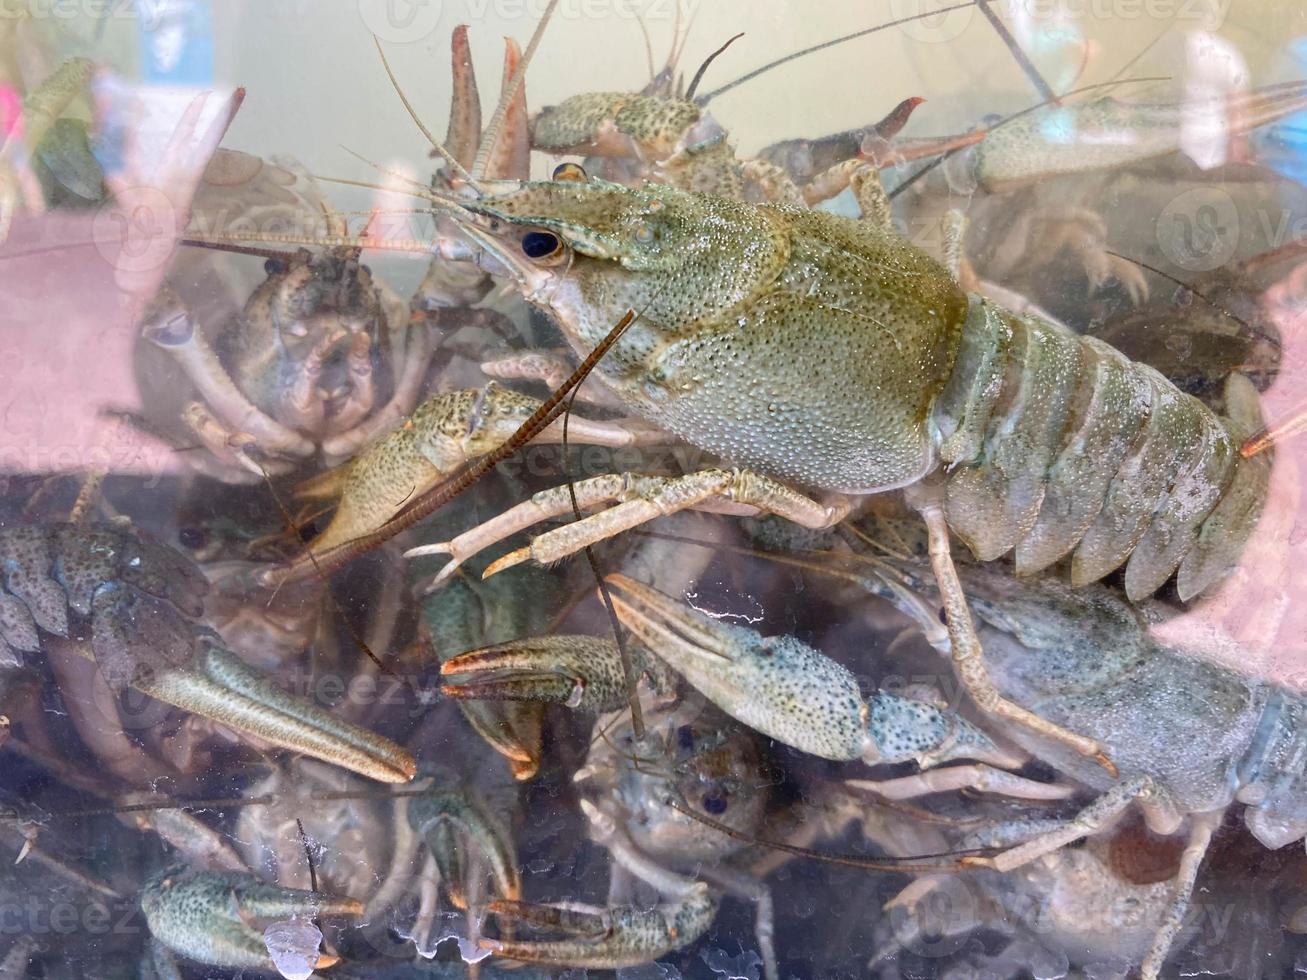 There are a lot of crayfish in a water tank on a farm where crustaceans are grown. One of the many crayfish trying to get out of the tank lifting the claws up along the glass wall photo